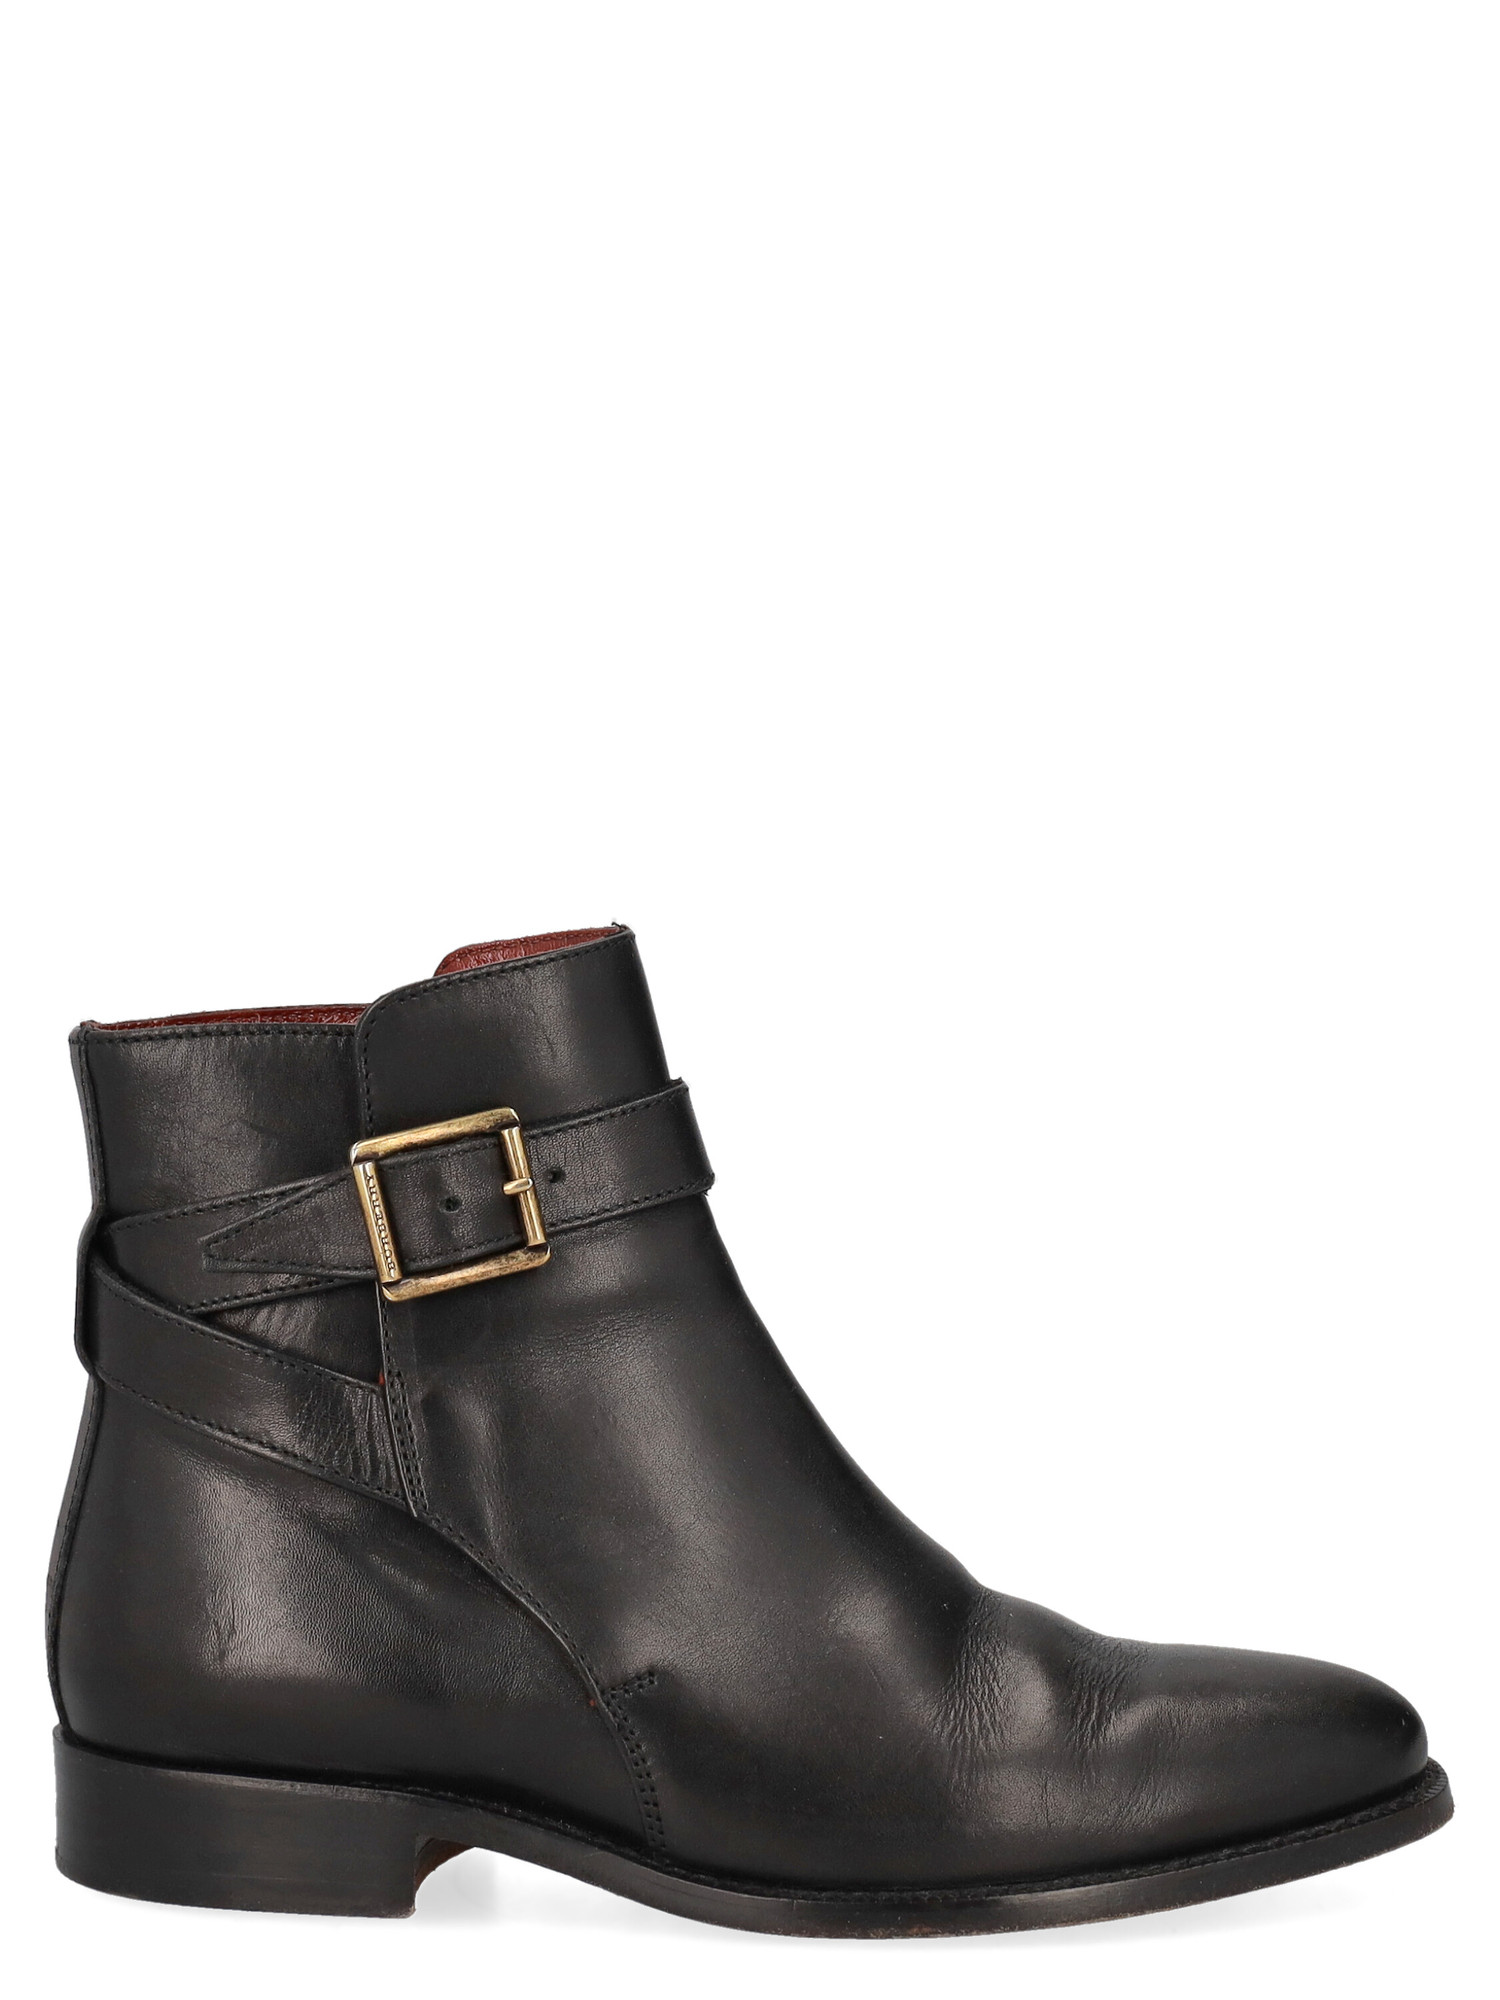 Women's Ankle Boots - Burberry - In Black Leather